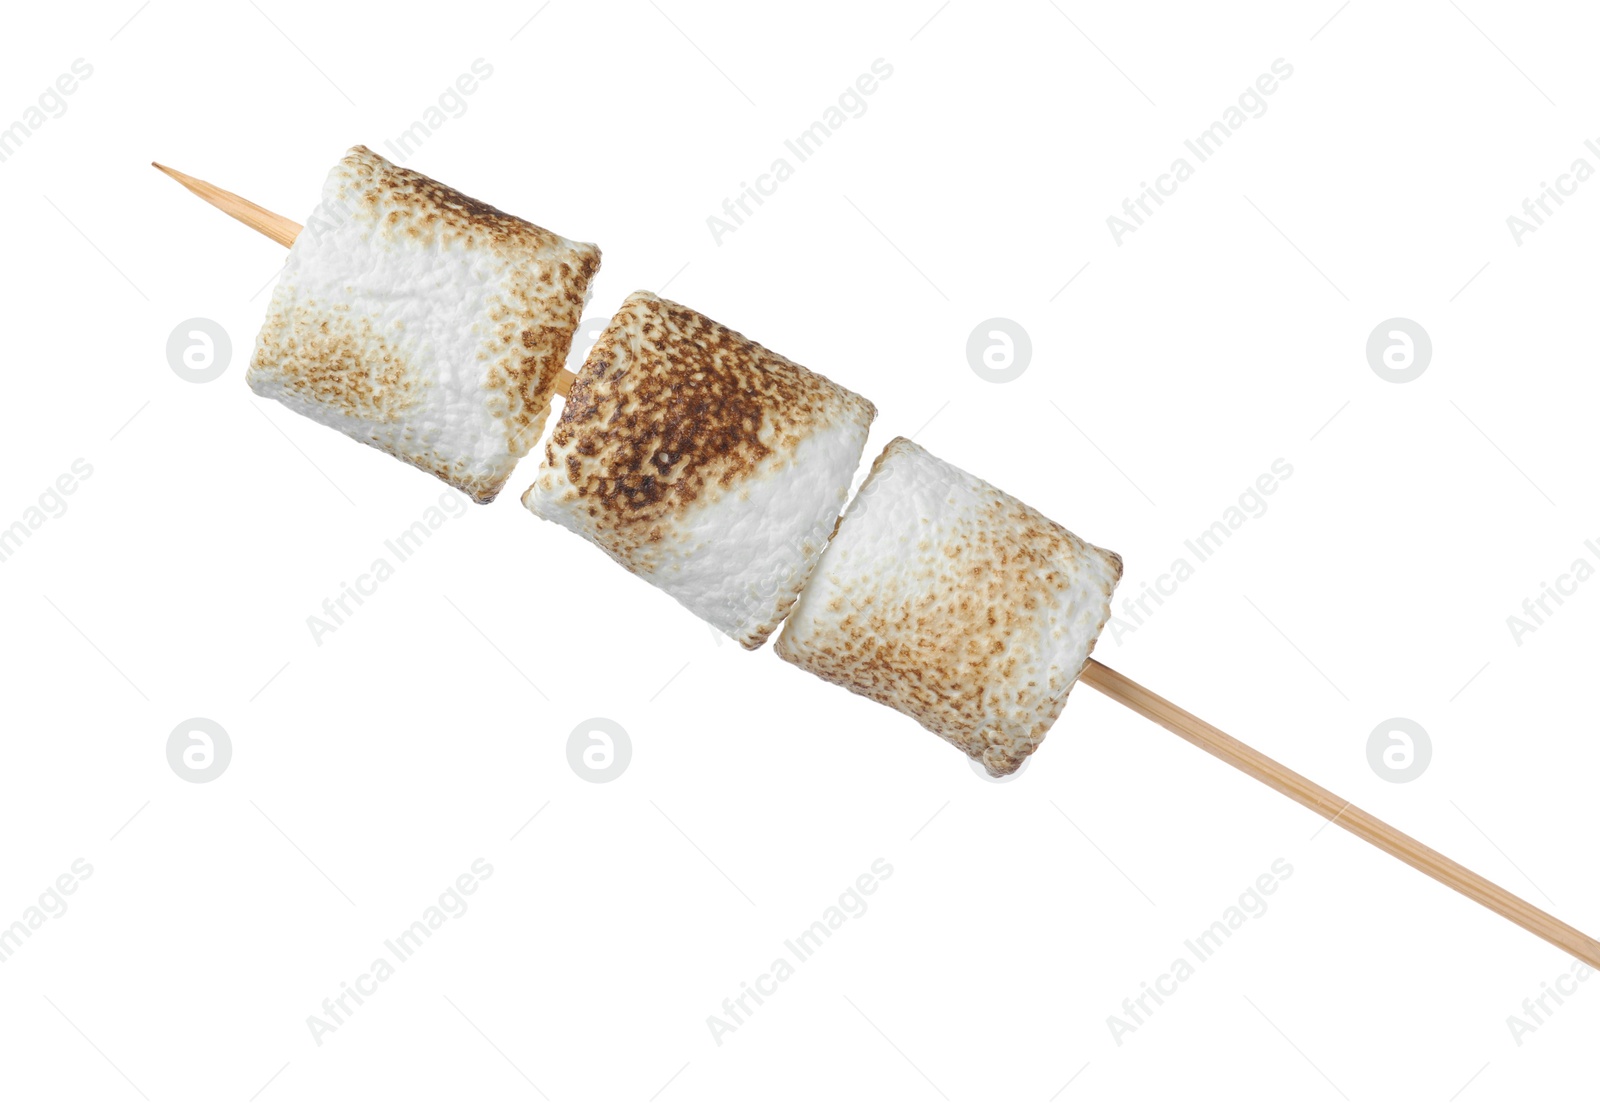 Photo of Stick with roasted marshmallows isolated on white